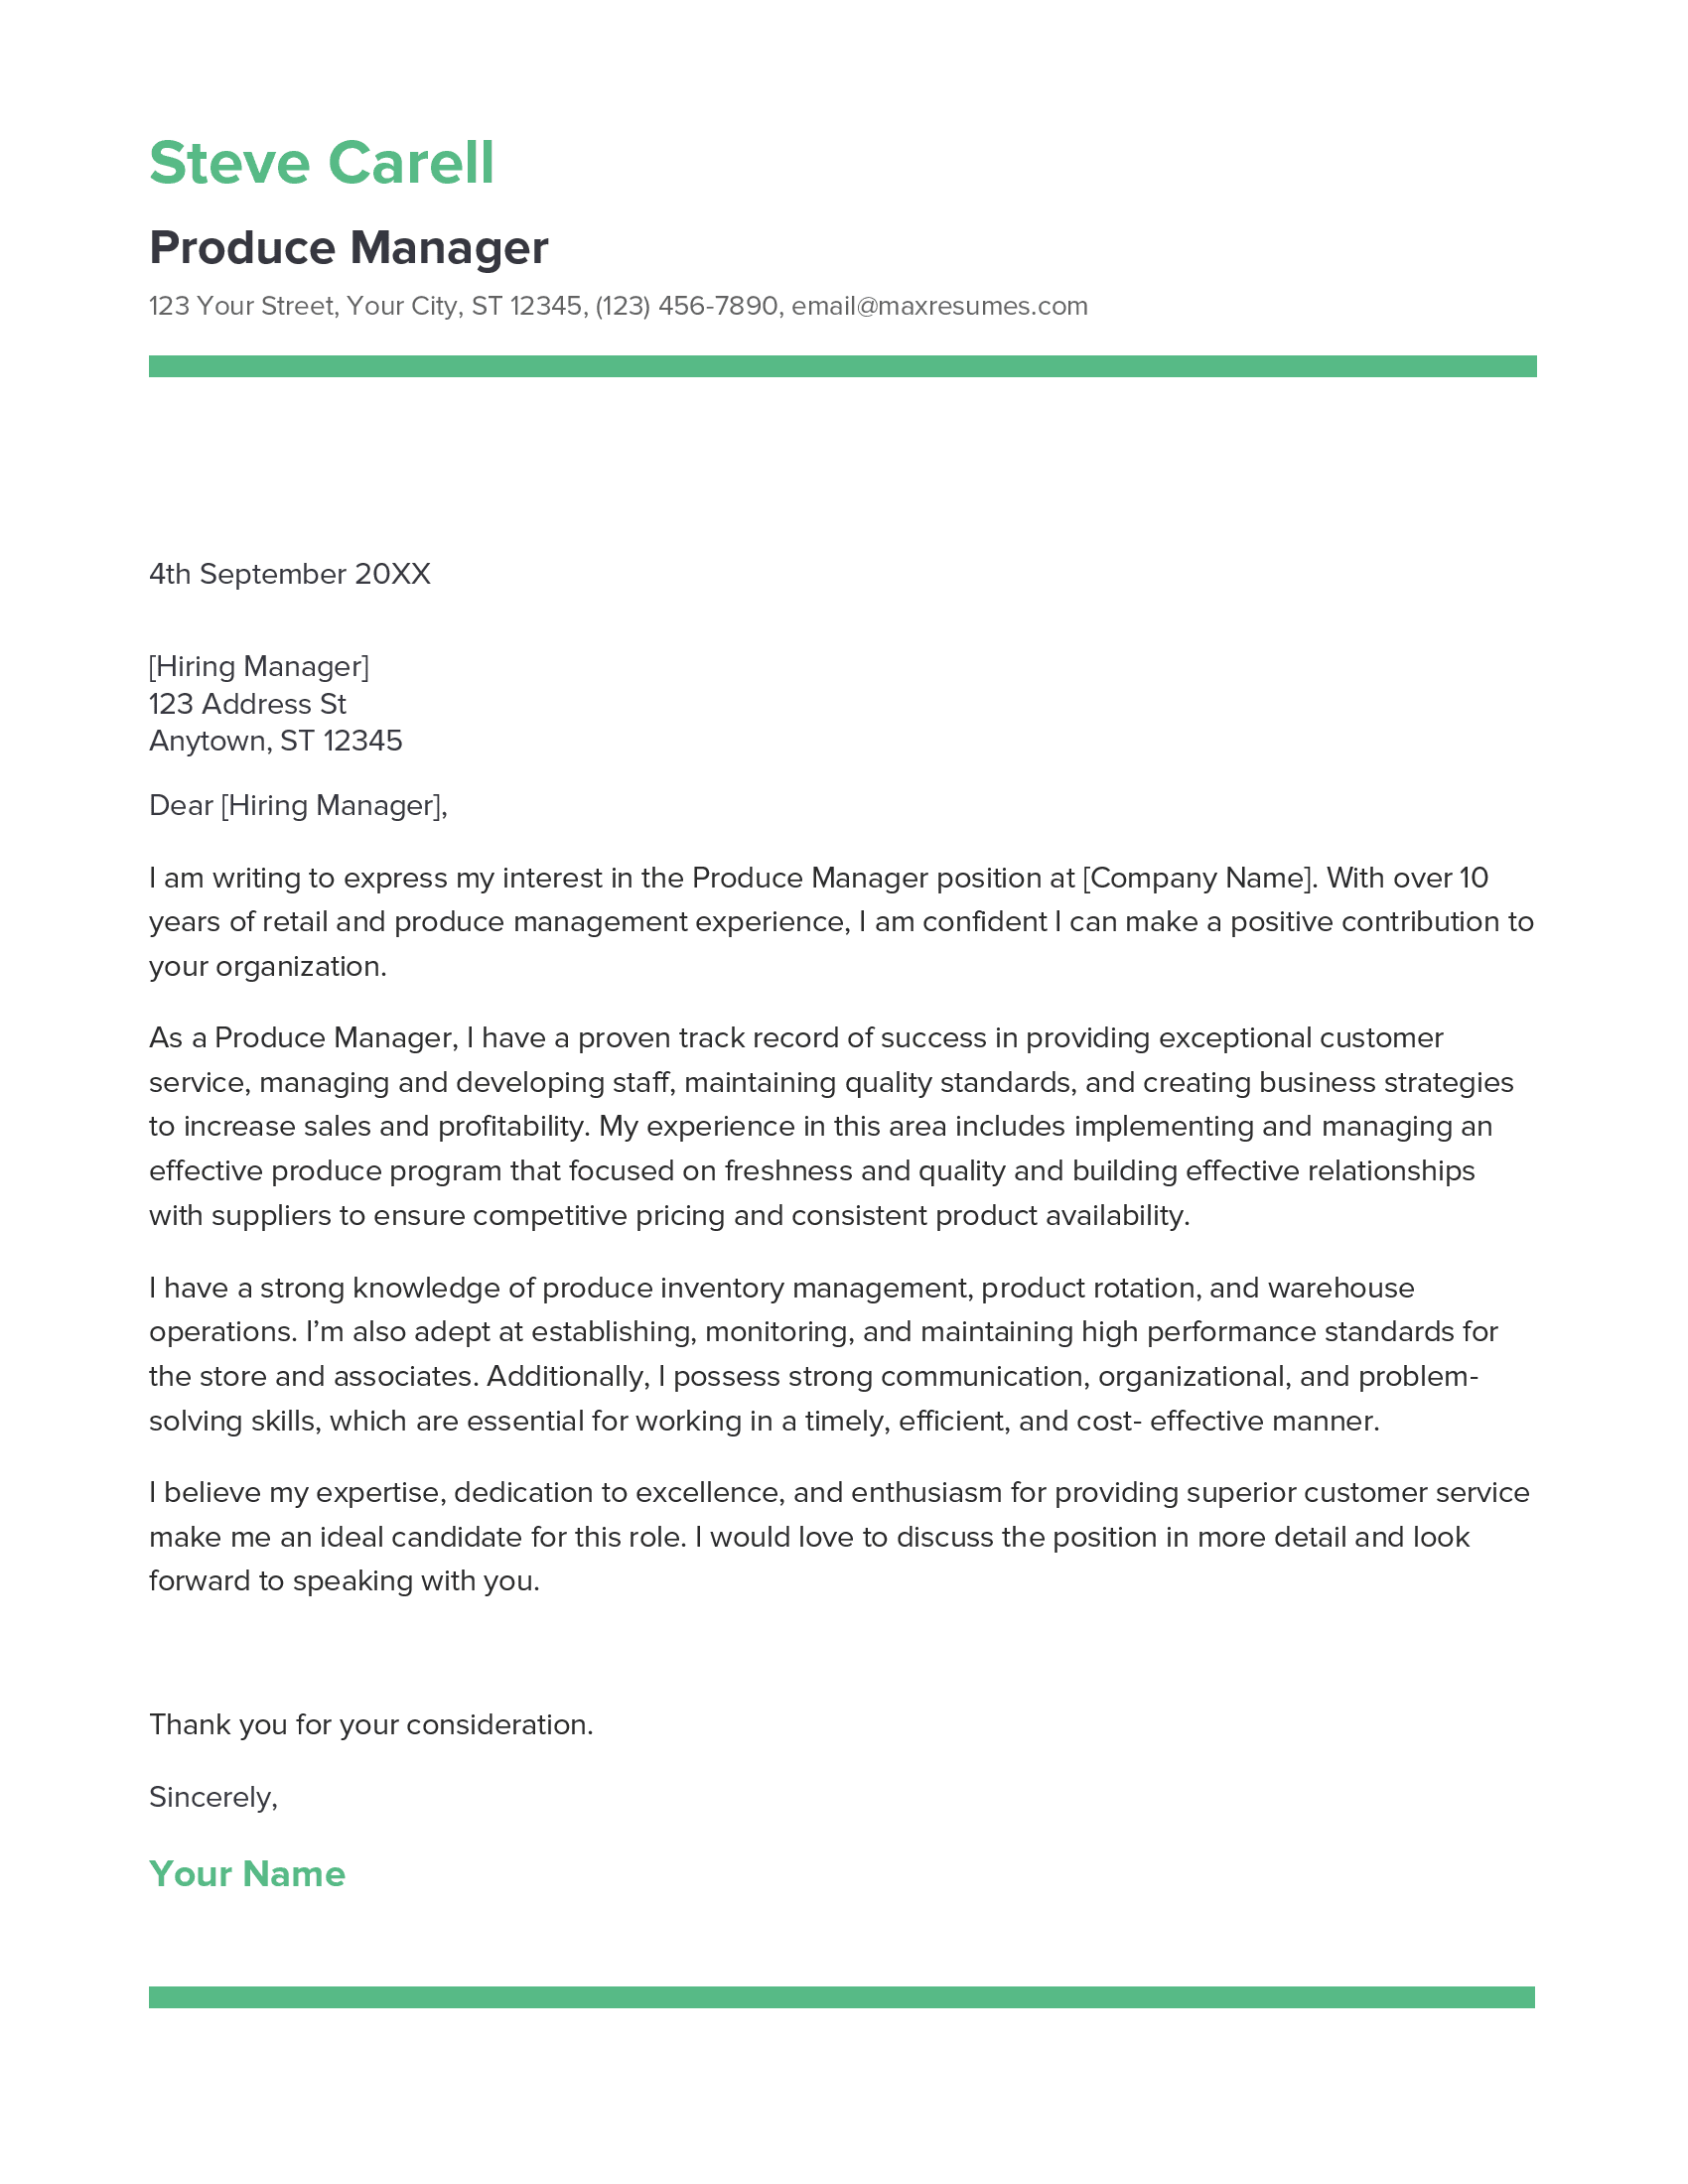 Produce Manager Cover Letter Example